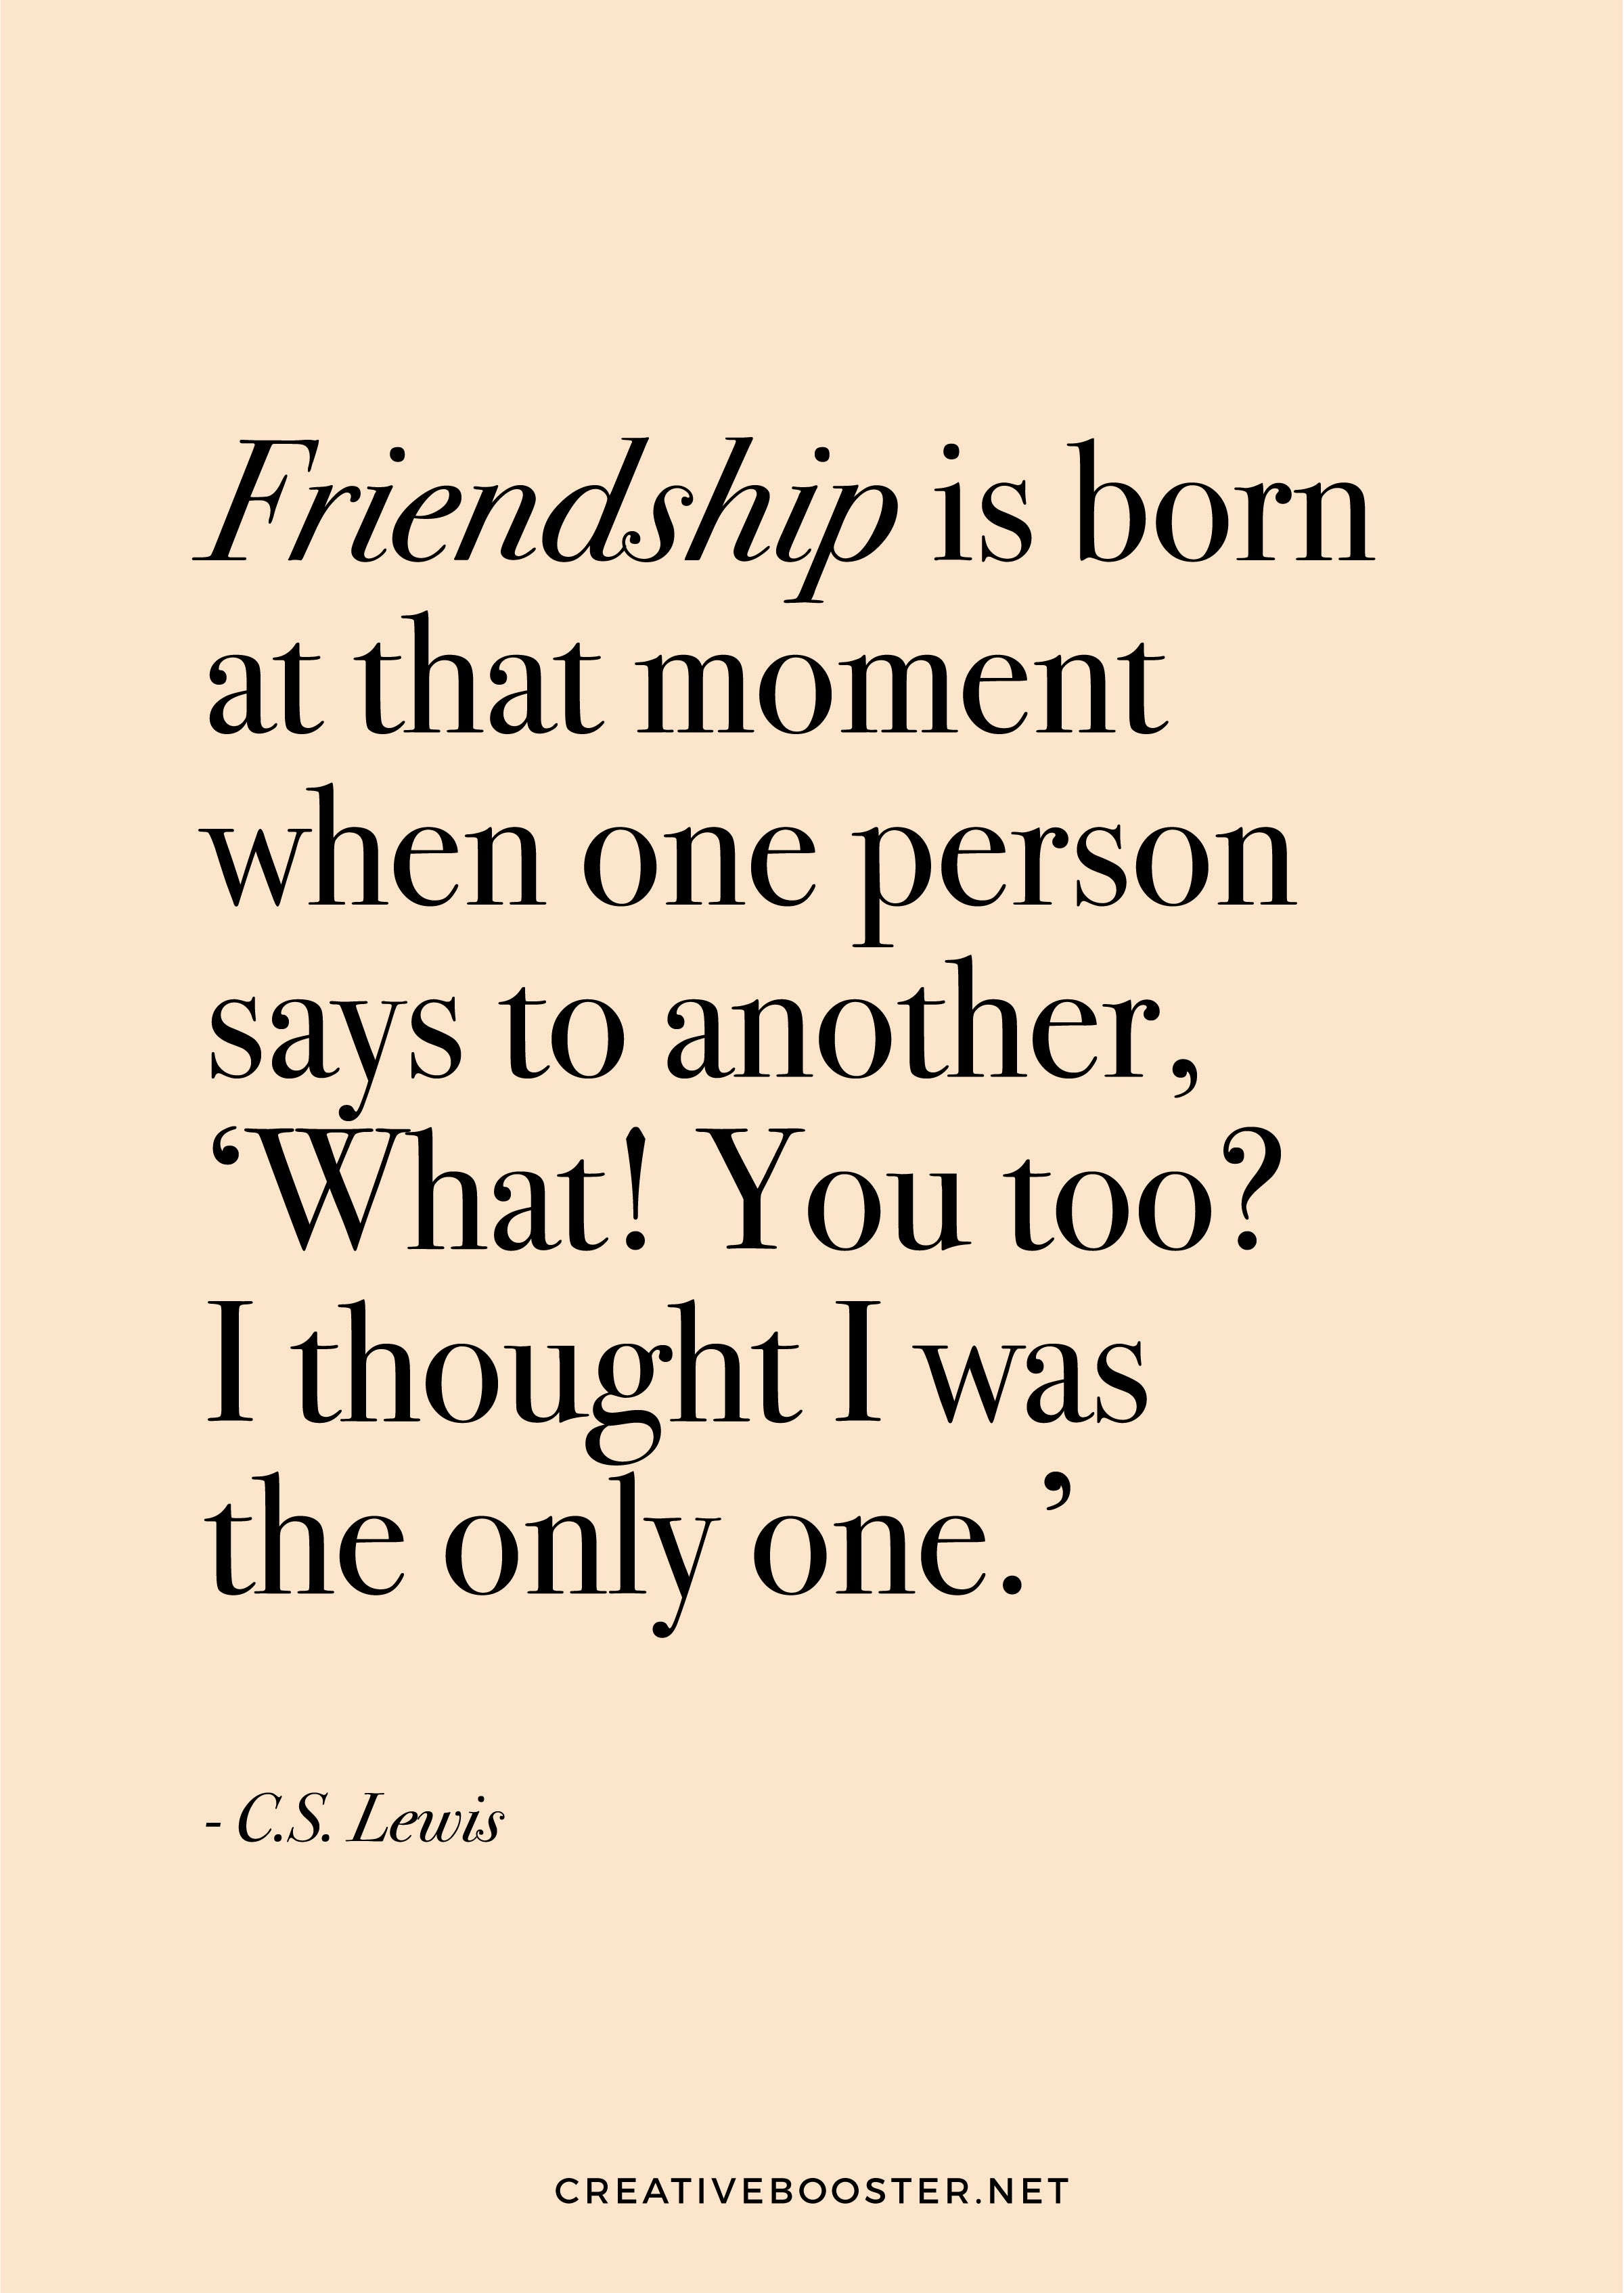 You-Got-This-Quotes-For-Friends-"Friendship is born at that moment when one person says to another, ‘What! You too? I thought I was the only one.’" - C.S. Lewis (Quote Art Print)